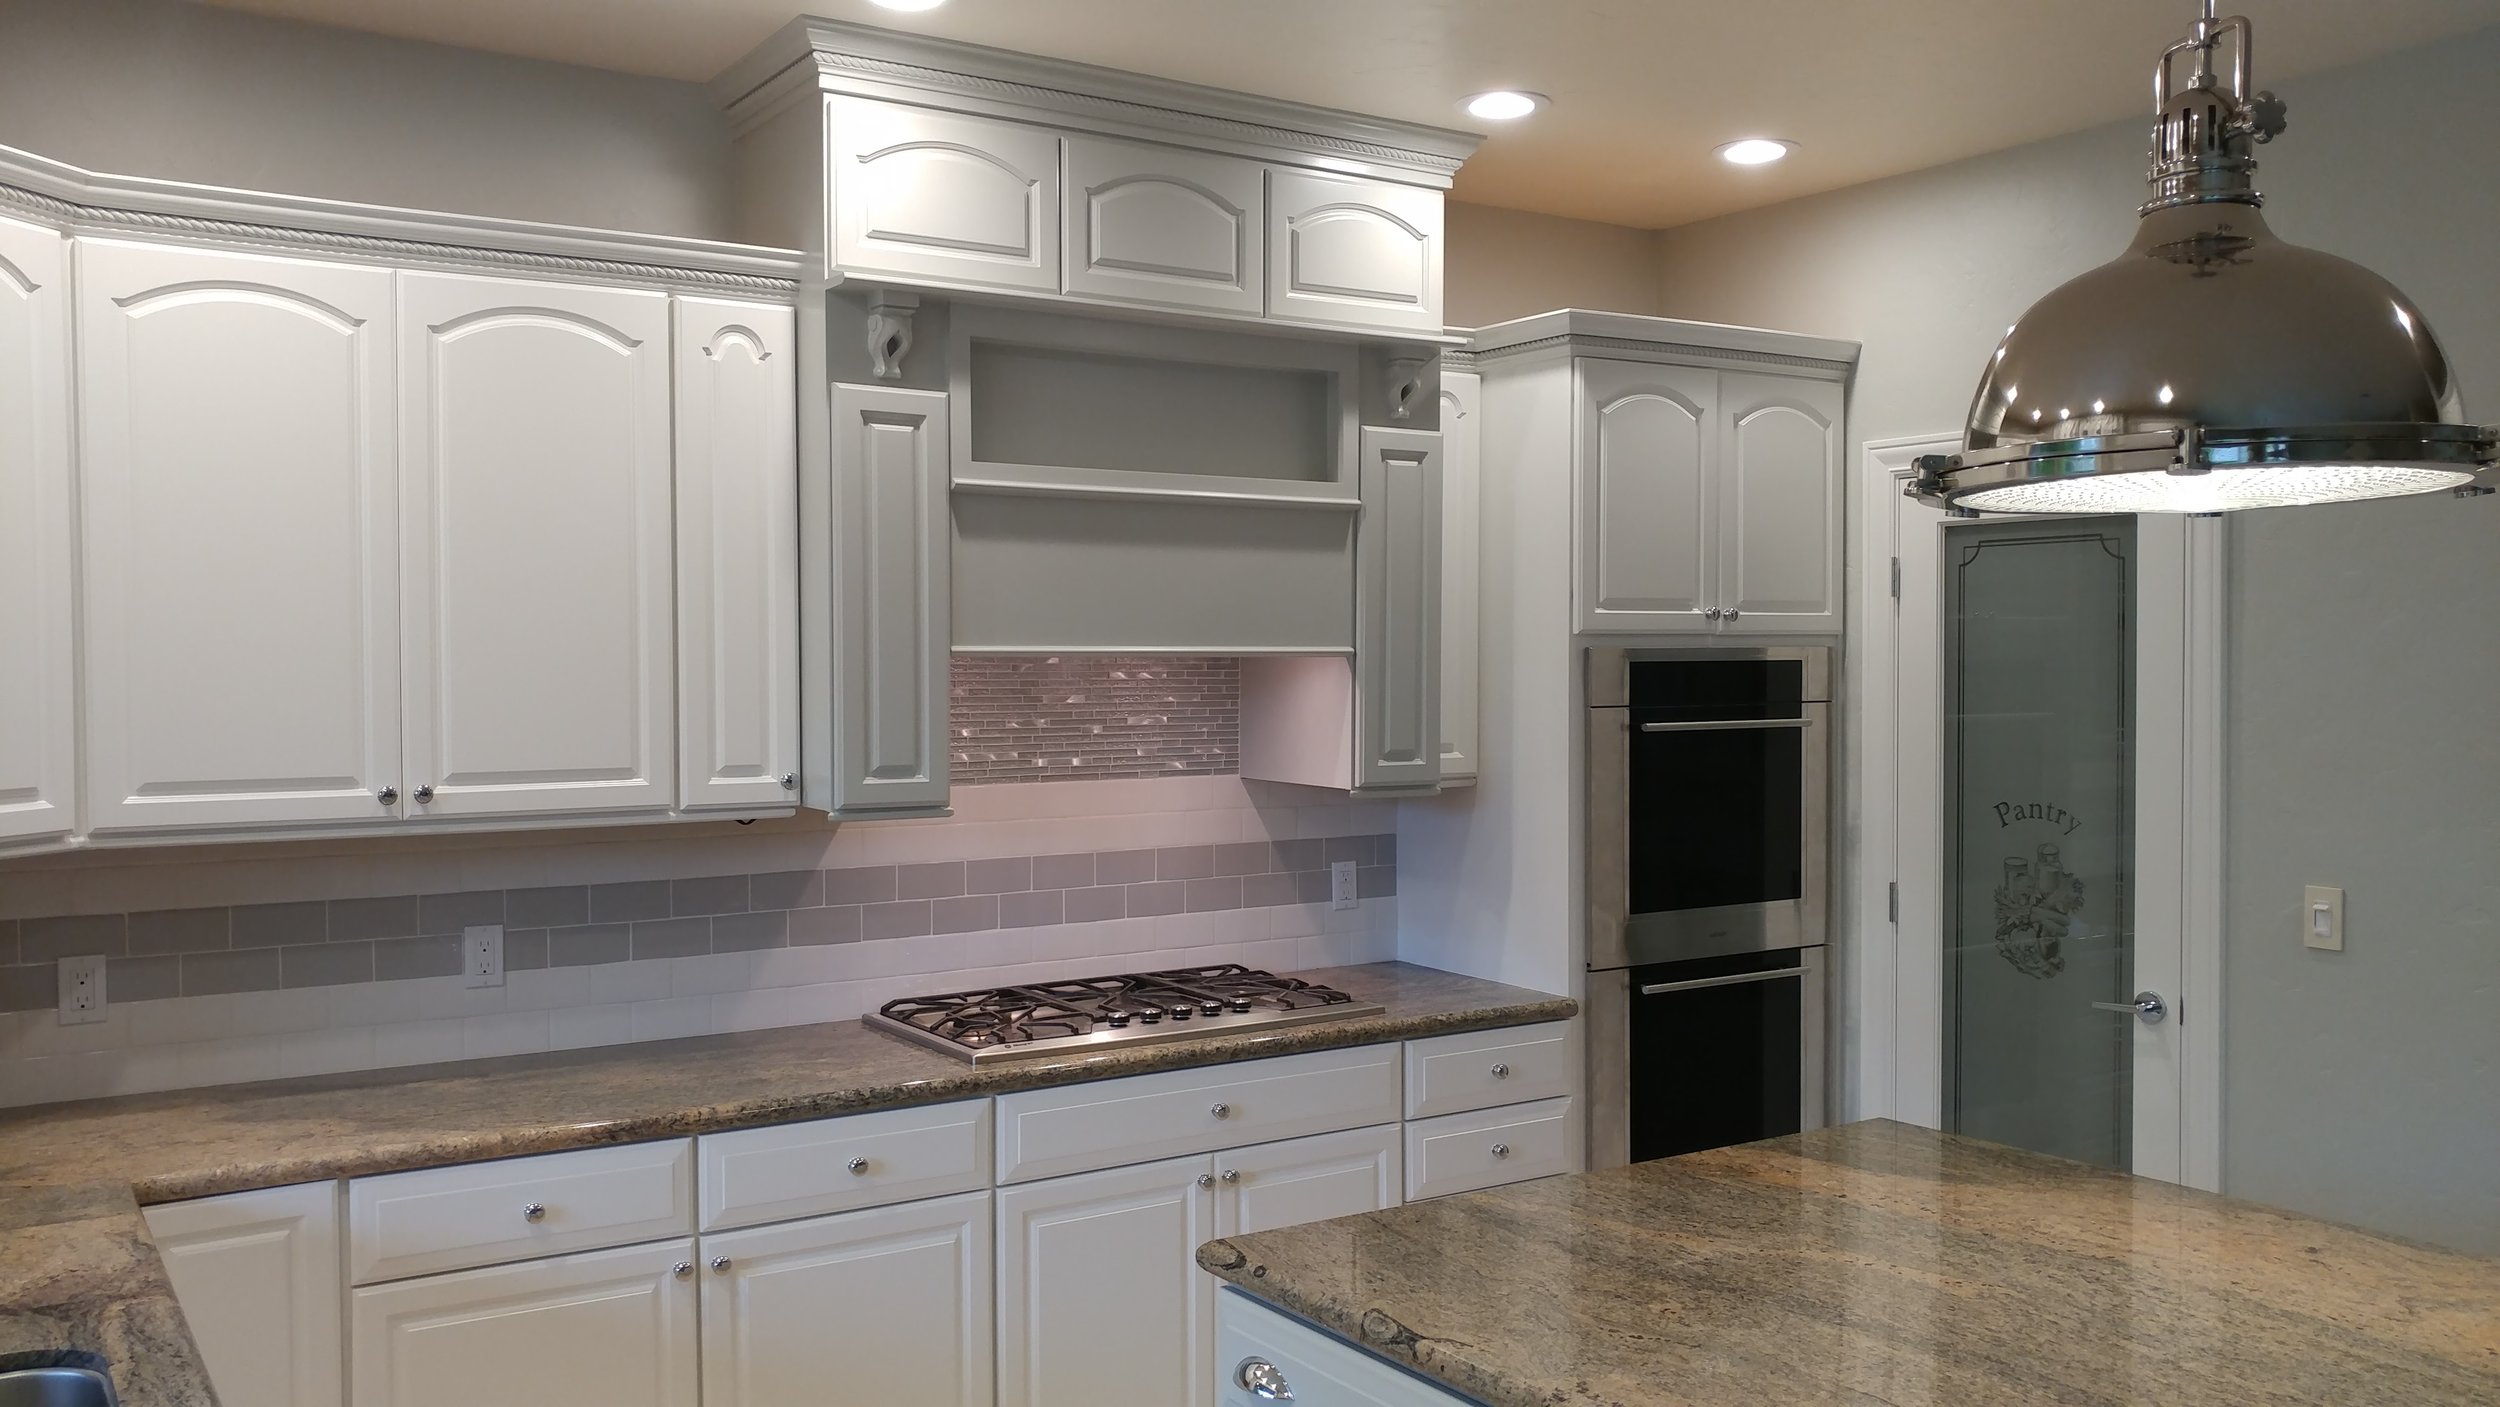 Cabinet Painting And Refinishing, Painting Kitchen Cabinets And Replacing Countertops